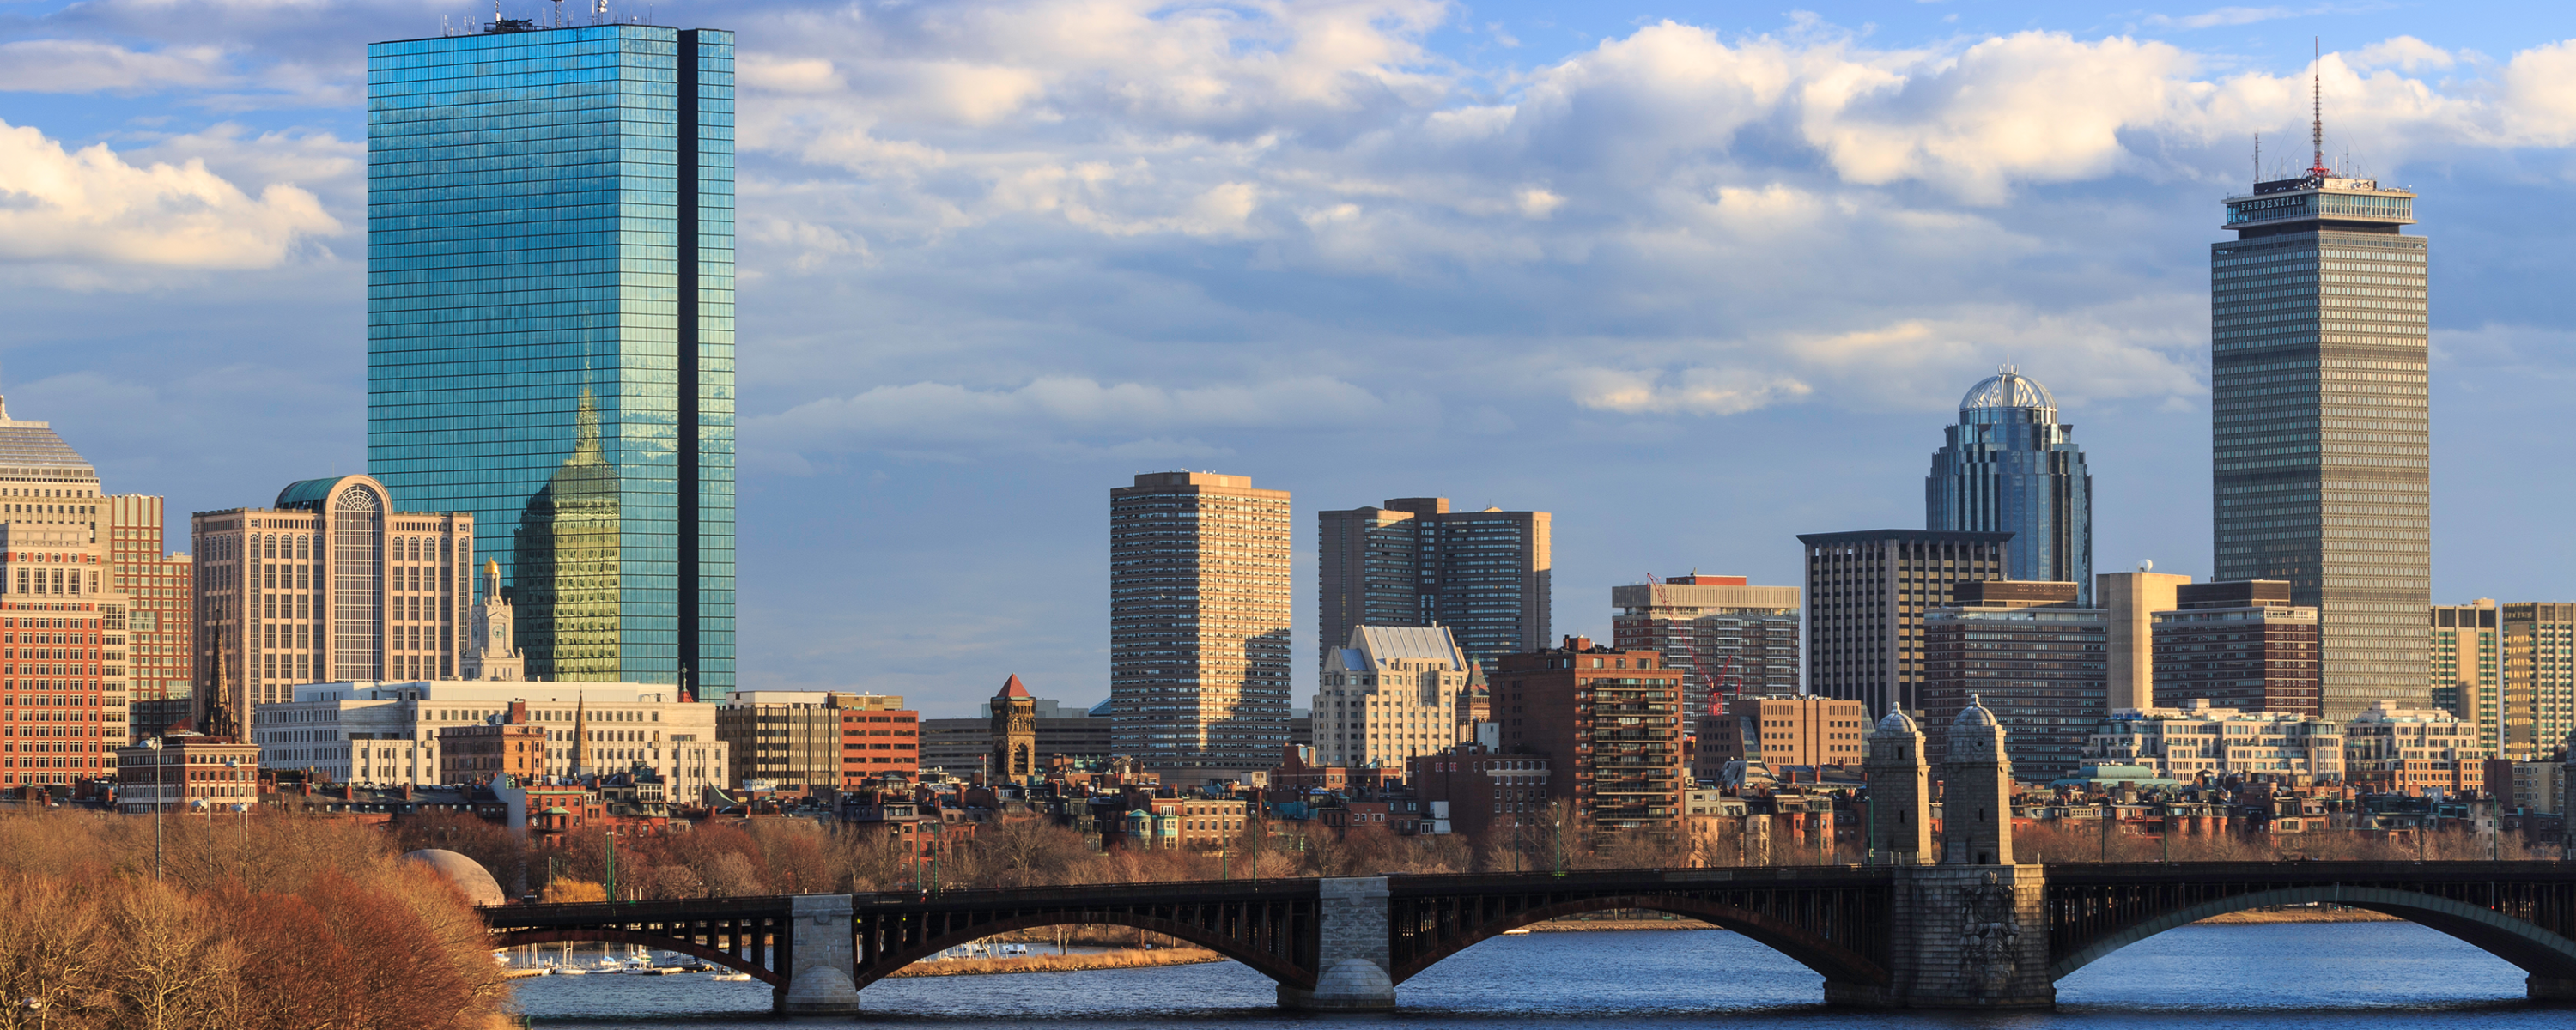 Boston, MA | Cities for Financial Empowerment Fund